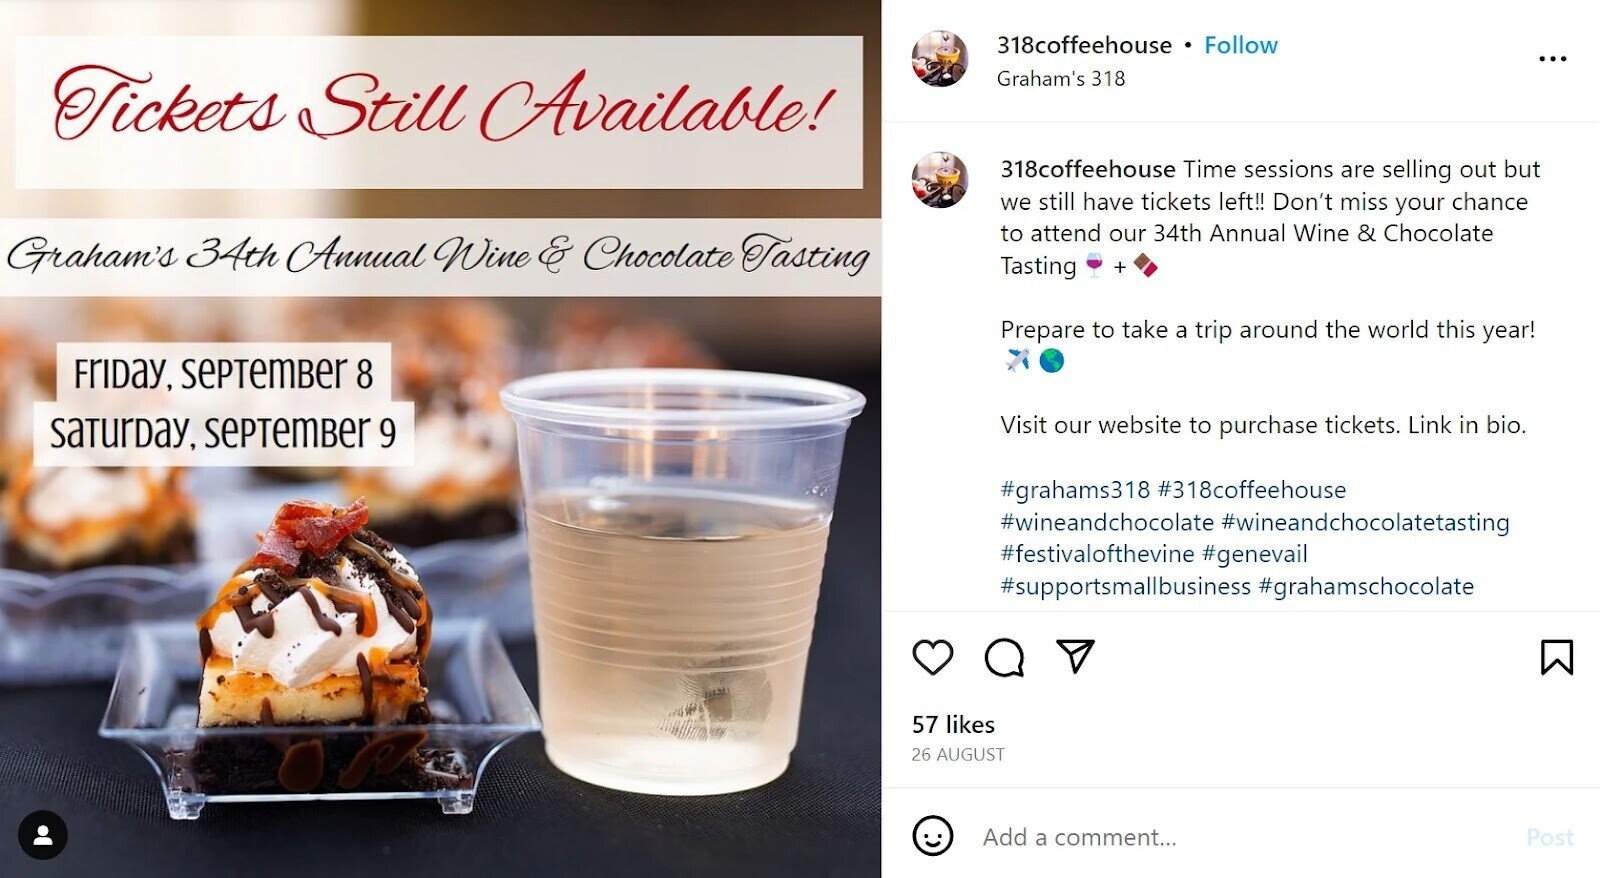 "318coffeehouse" announces in Instagram post there are still tickets left for "34th Annual Wine & Chocolate Tasting" even